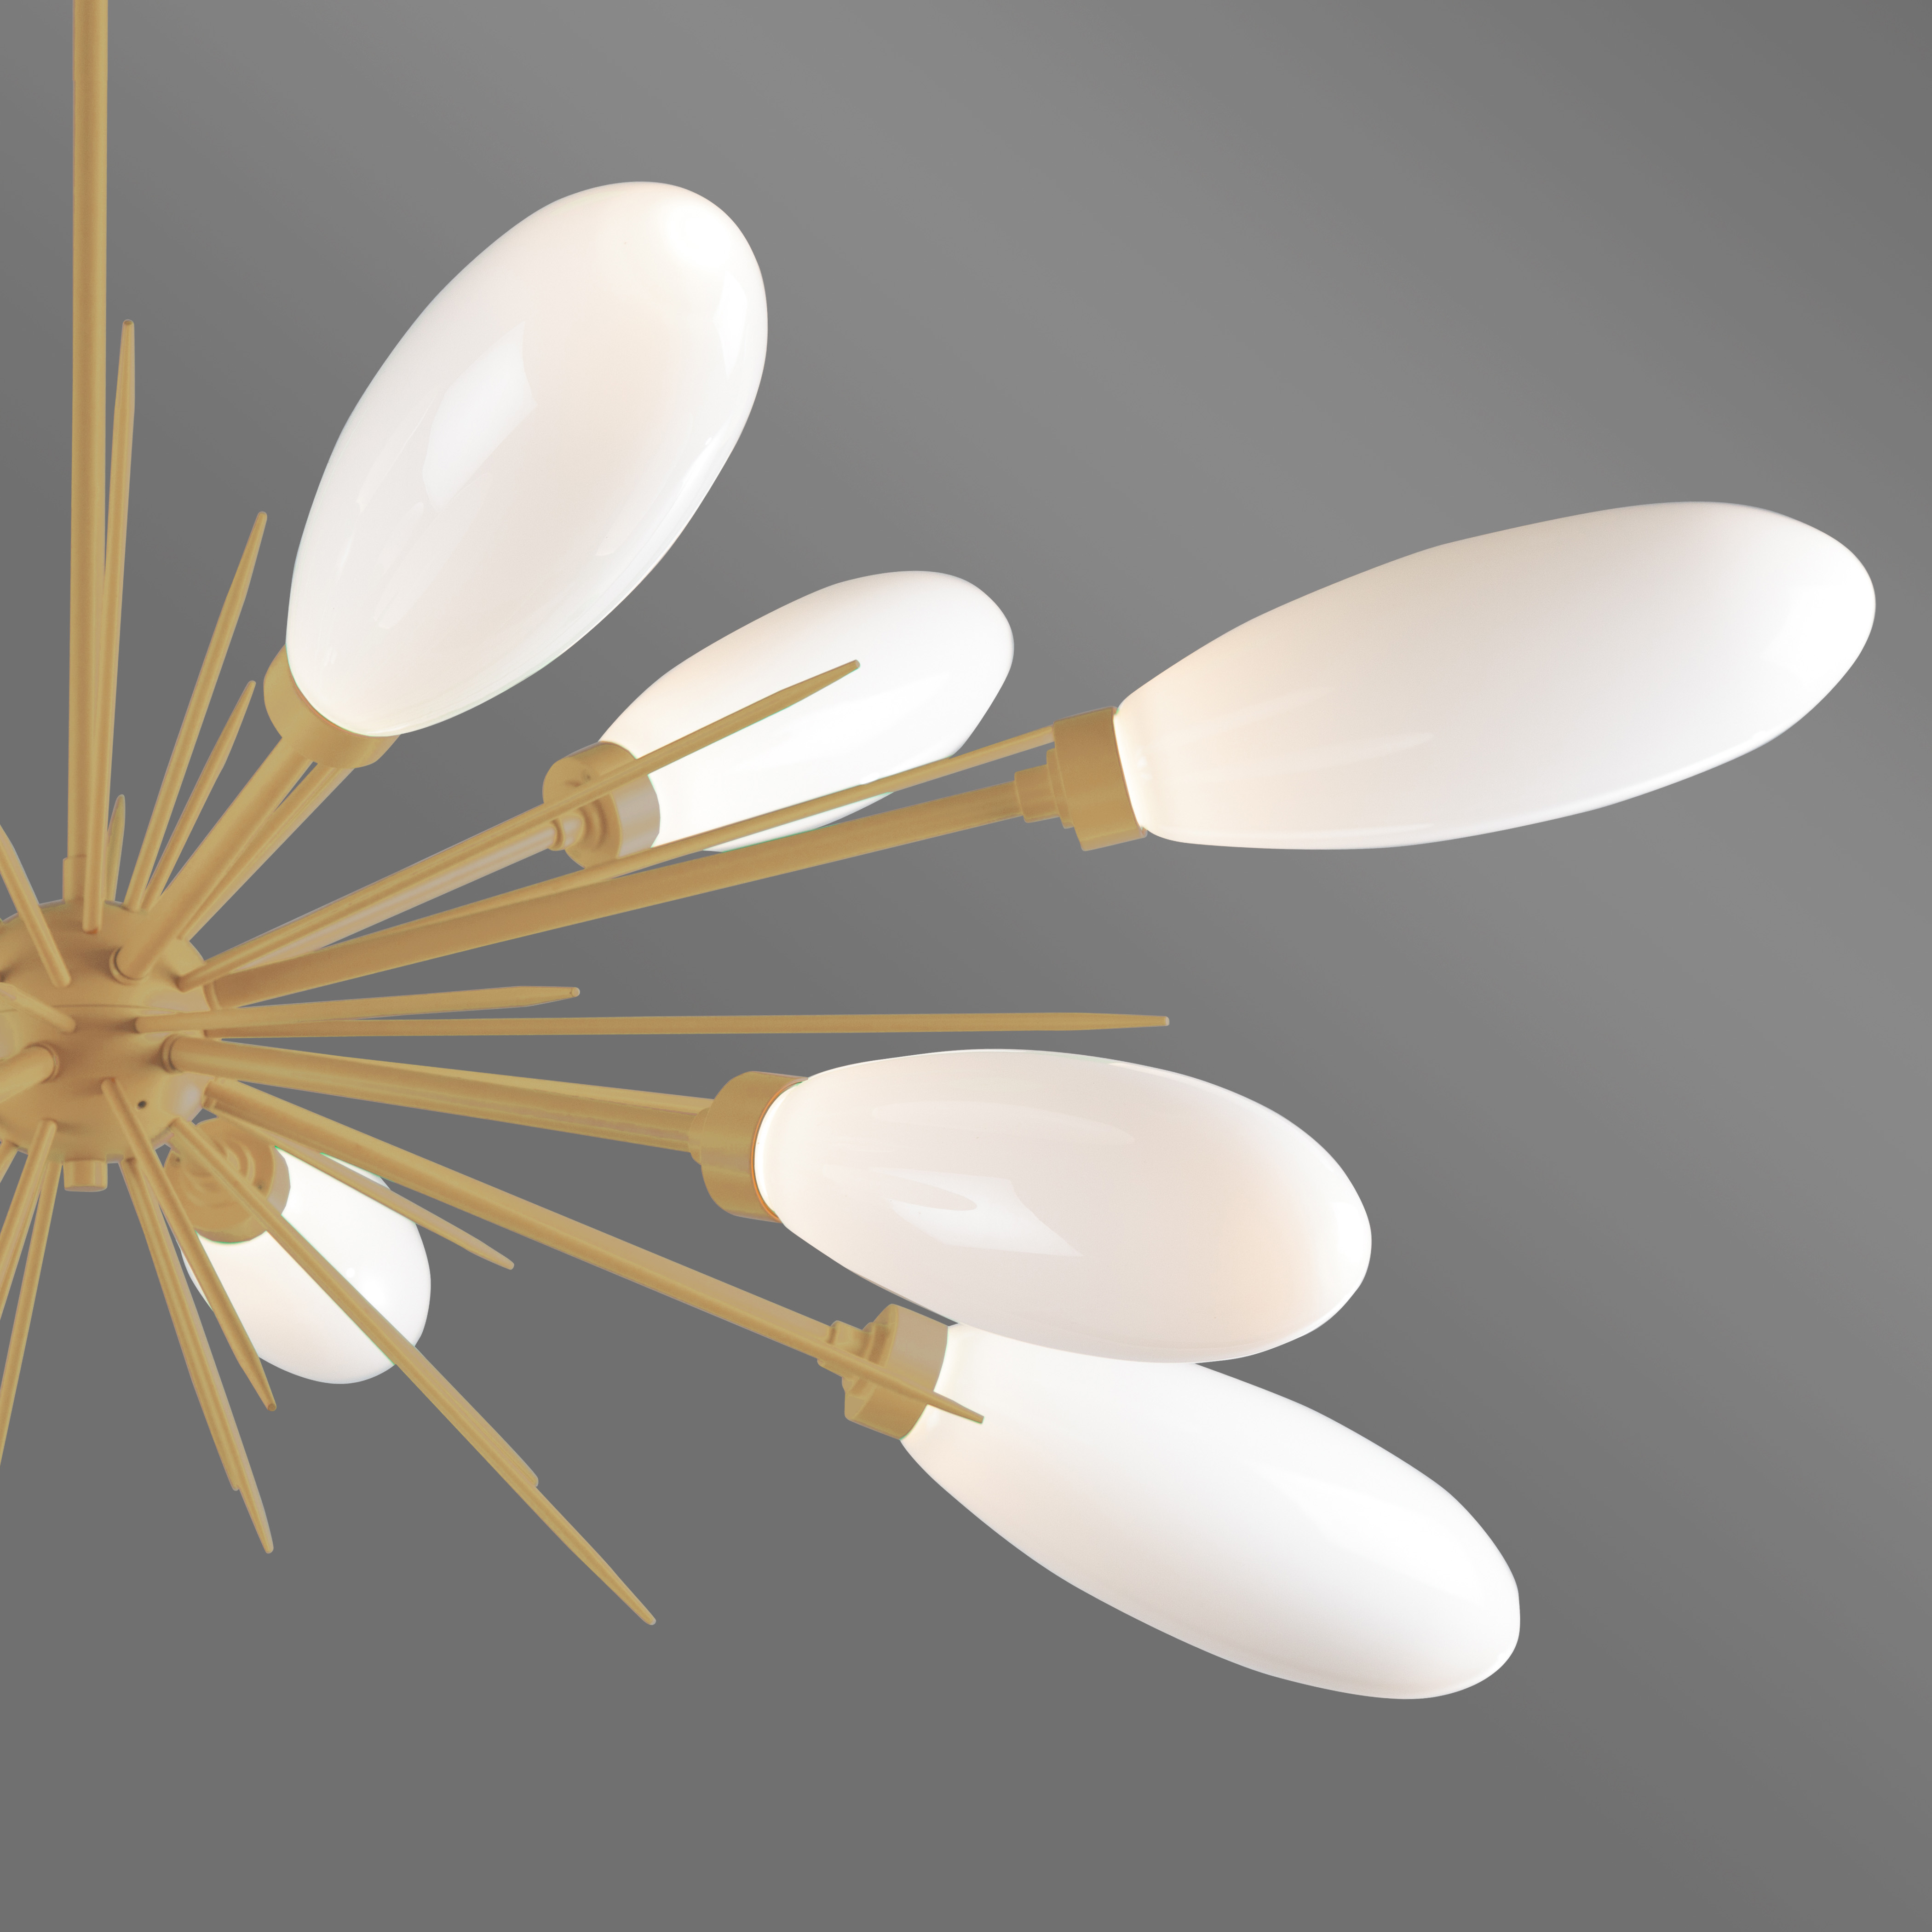 Closeup detail of a Hammerton Studio Fiori starburst chandelier with brass finish and white oval light shades.